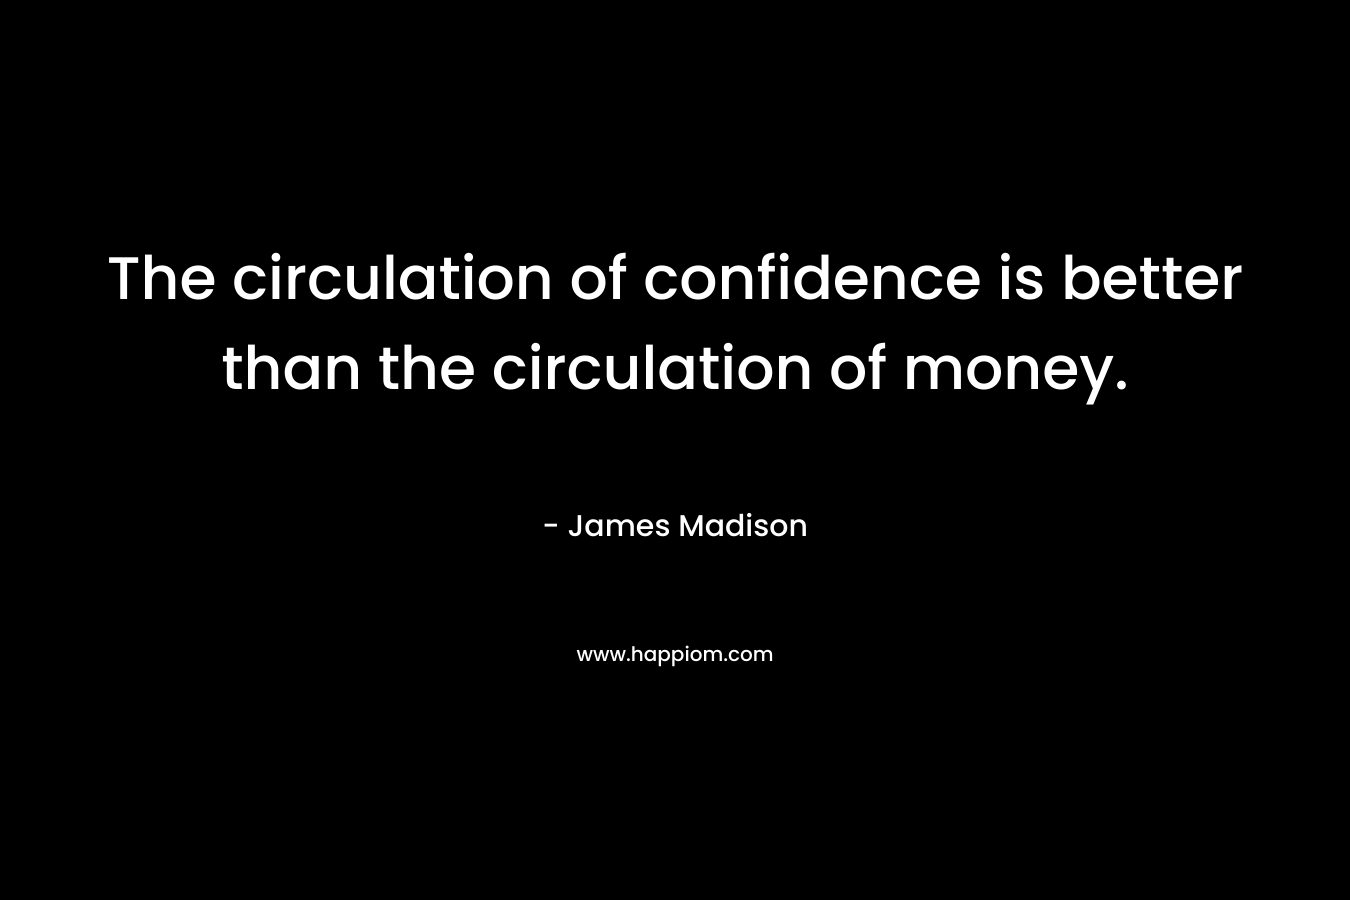 The circulation of confidence is better than the circulation of money. – James Madison